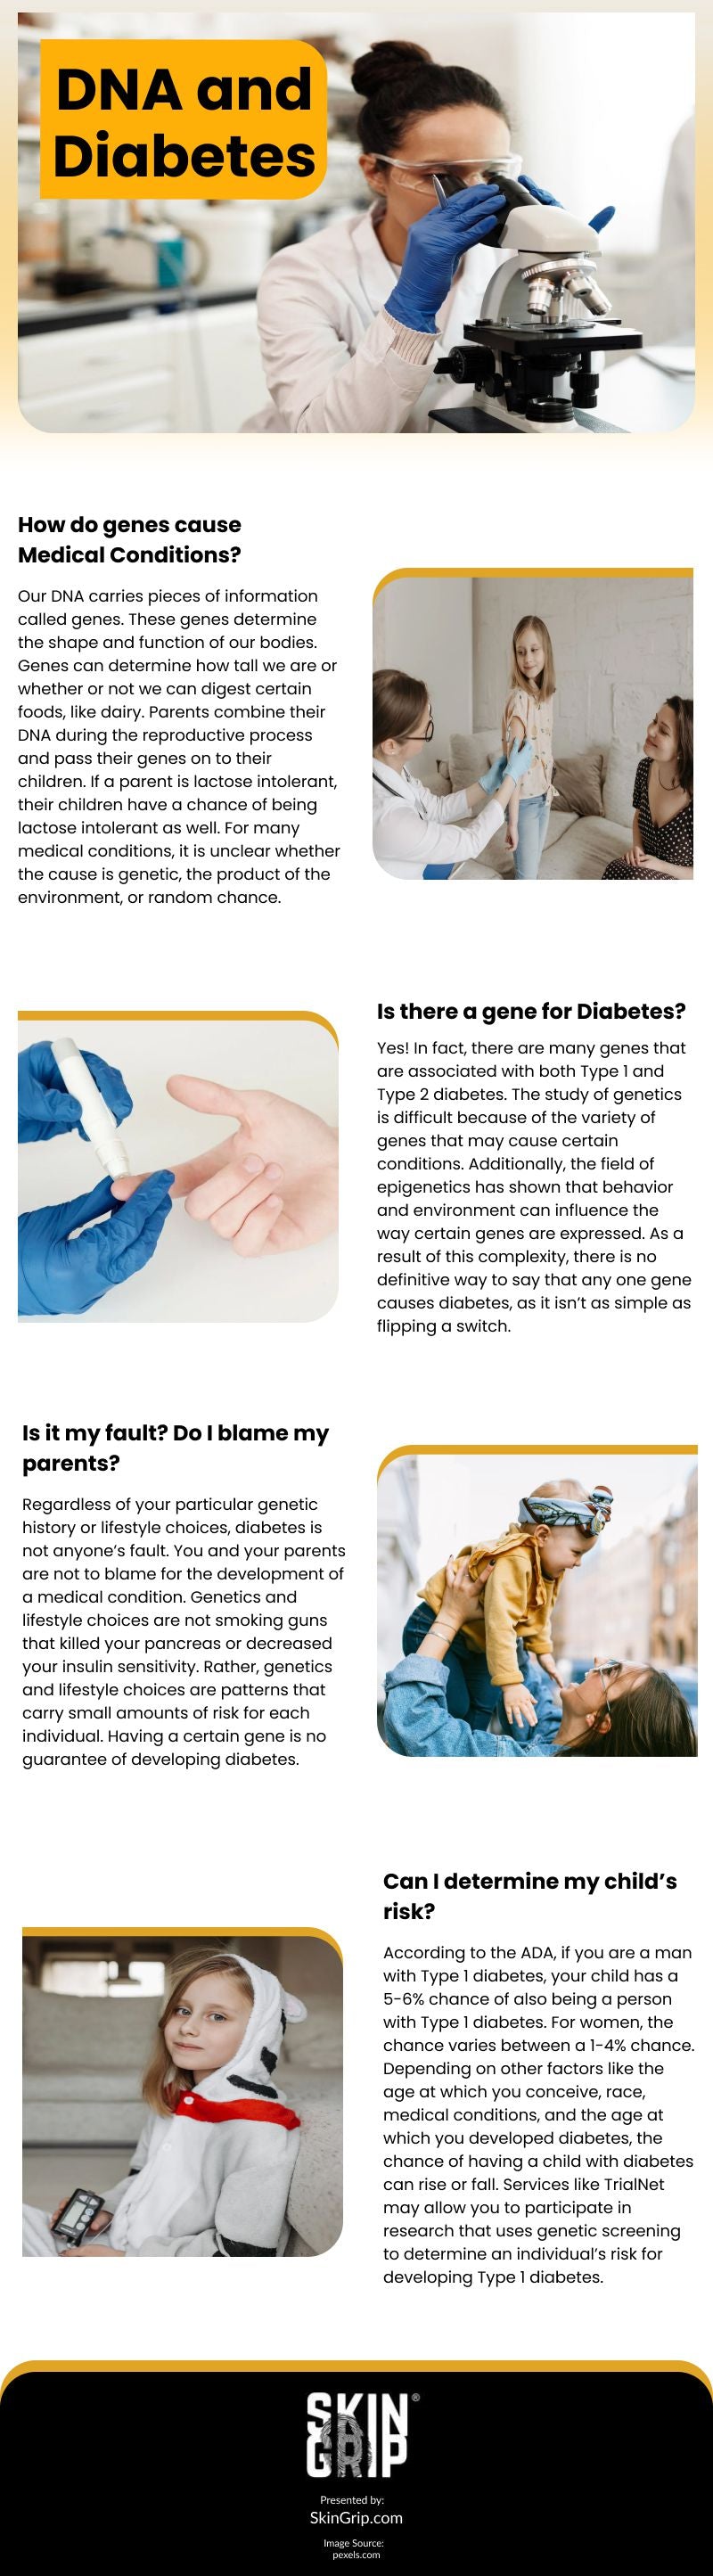 DNA and Diabetes Infographic